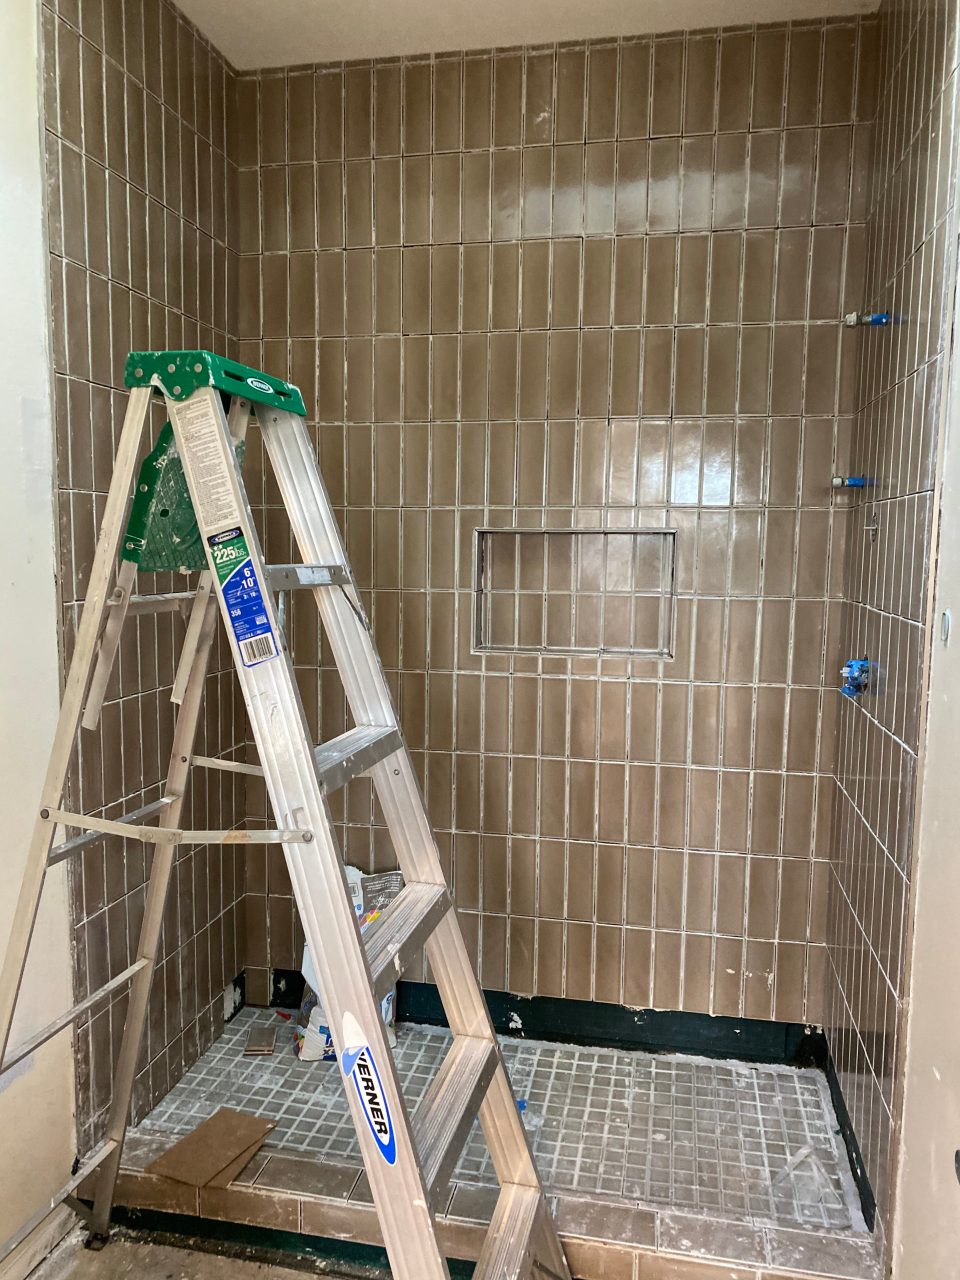 The new fireclay tile in our shower is looking good, but we're not done yet!